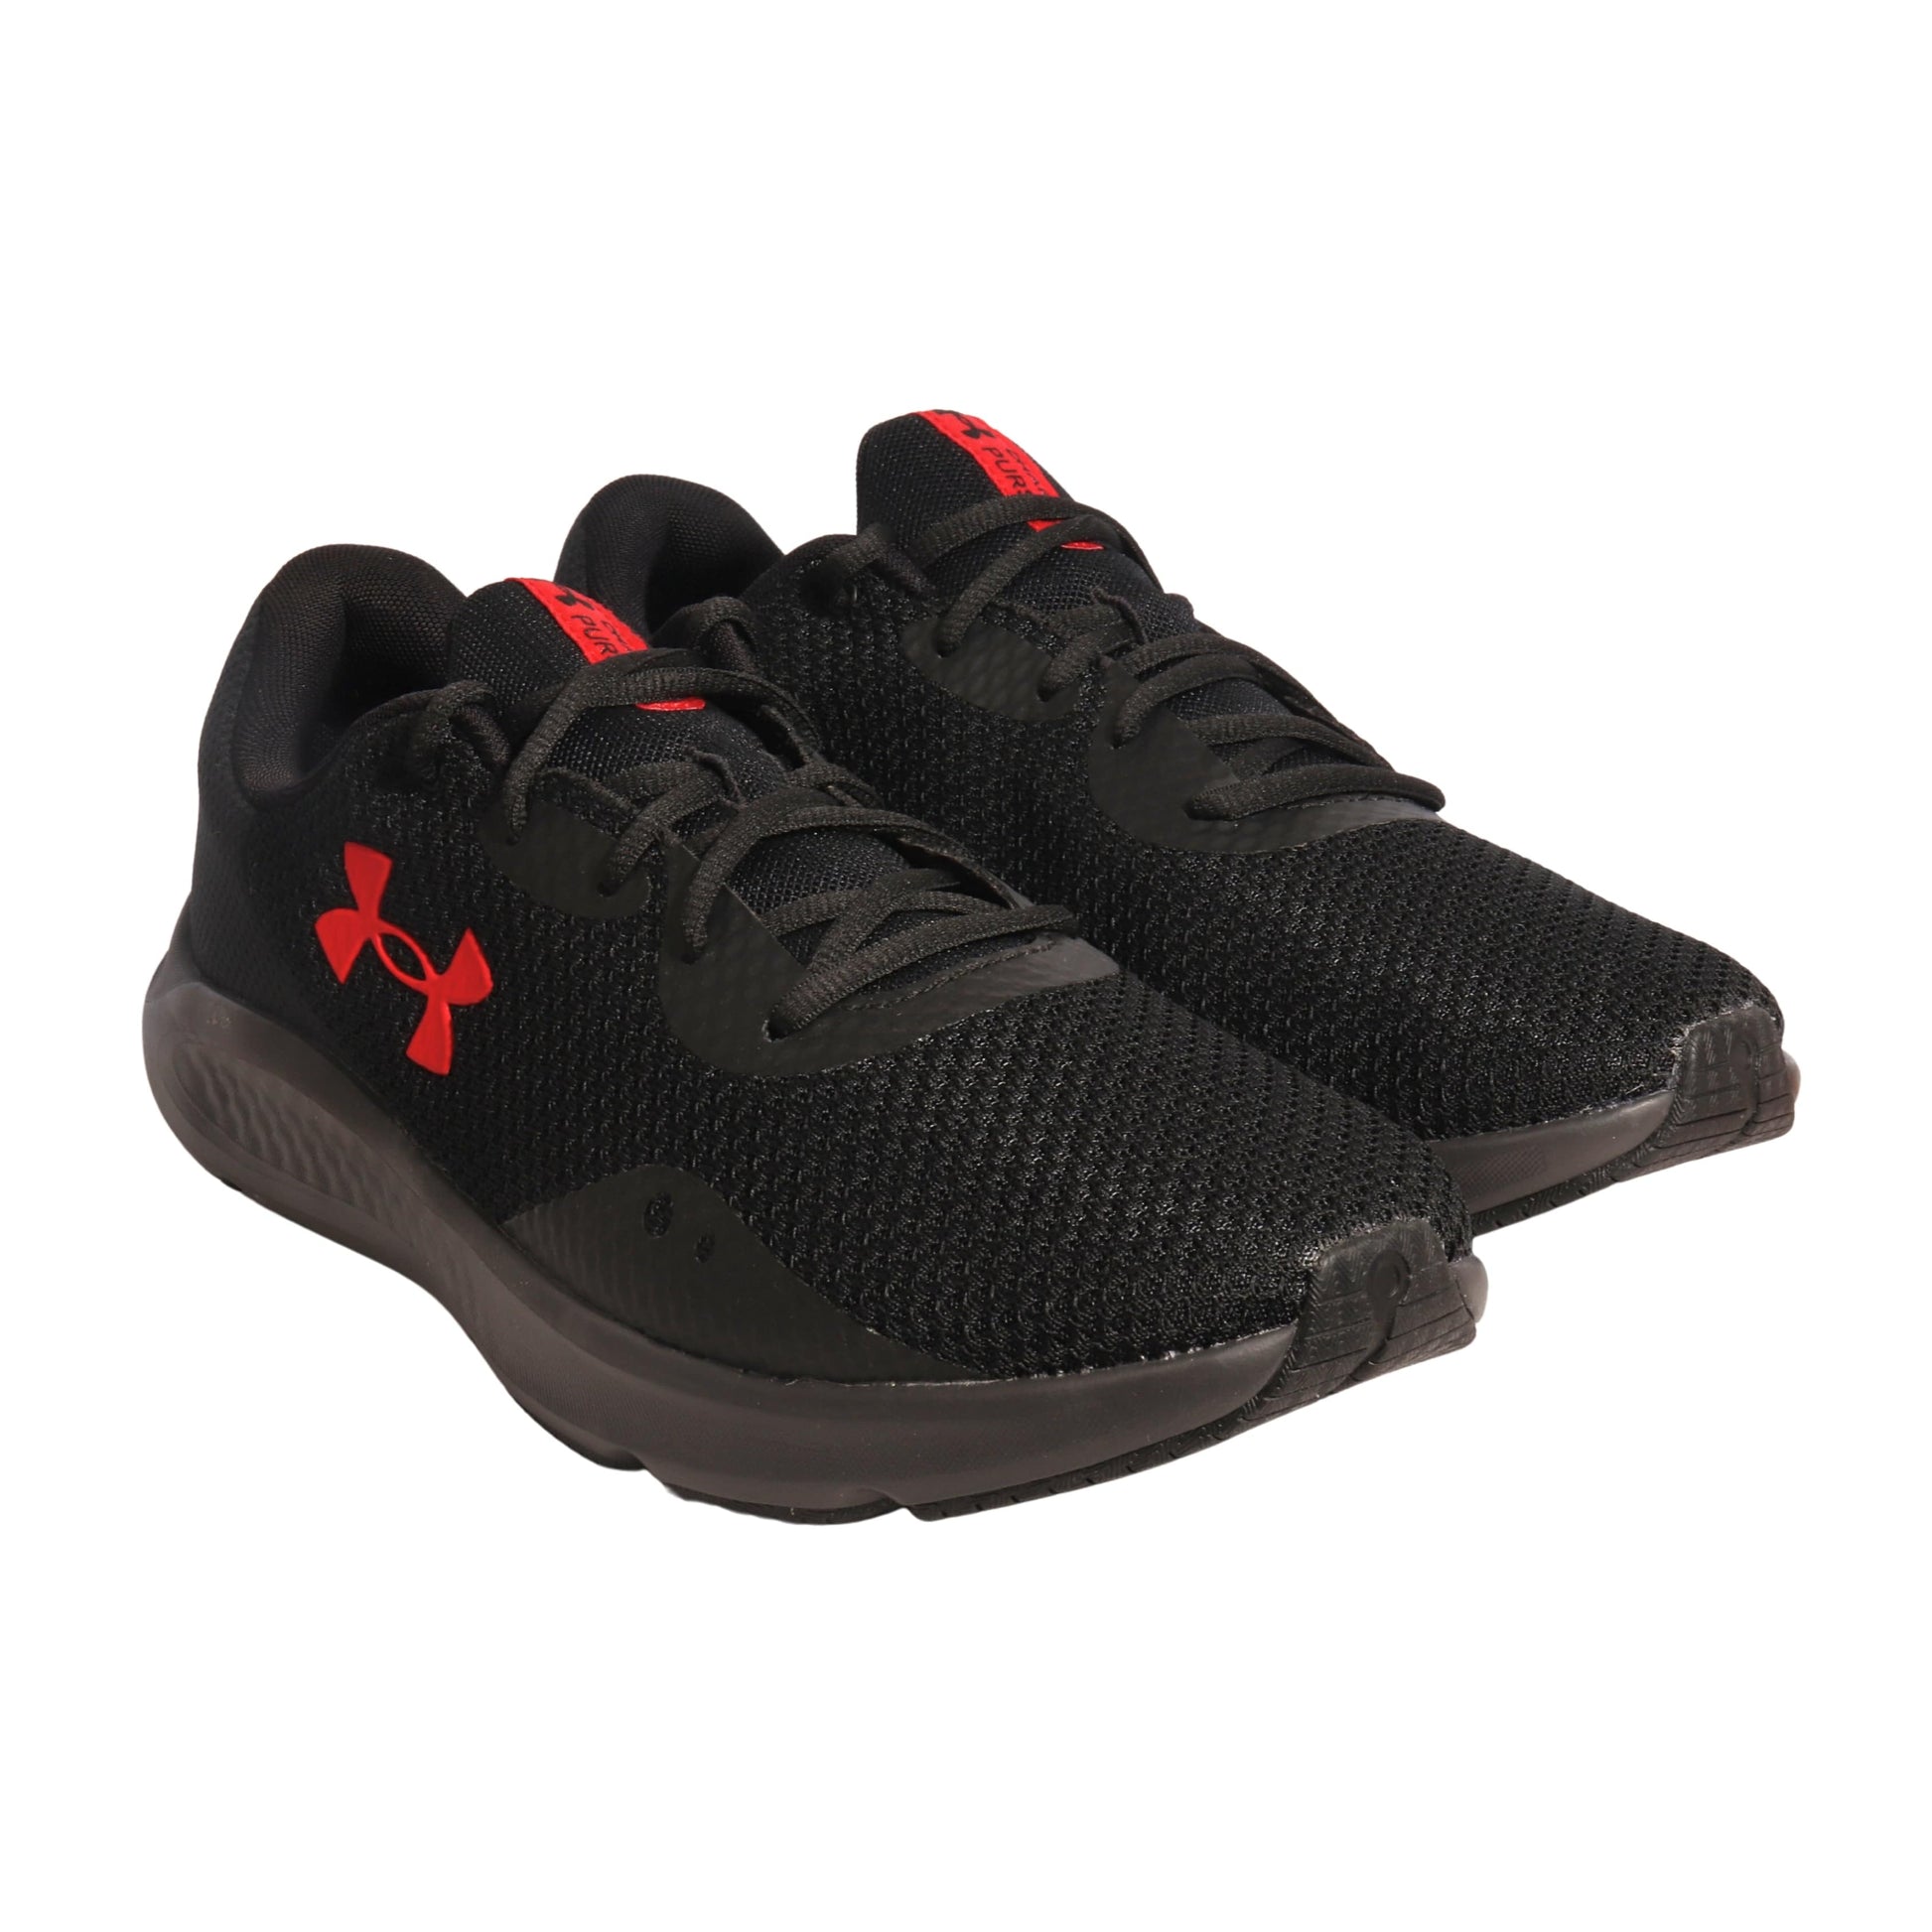 UNDER ARMOUR Athletic Shoes 44.5 / Black UNDER ARMOUR - Men's Charged Pursuit 3 Running Shoe